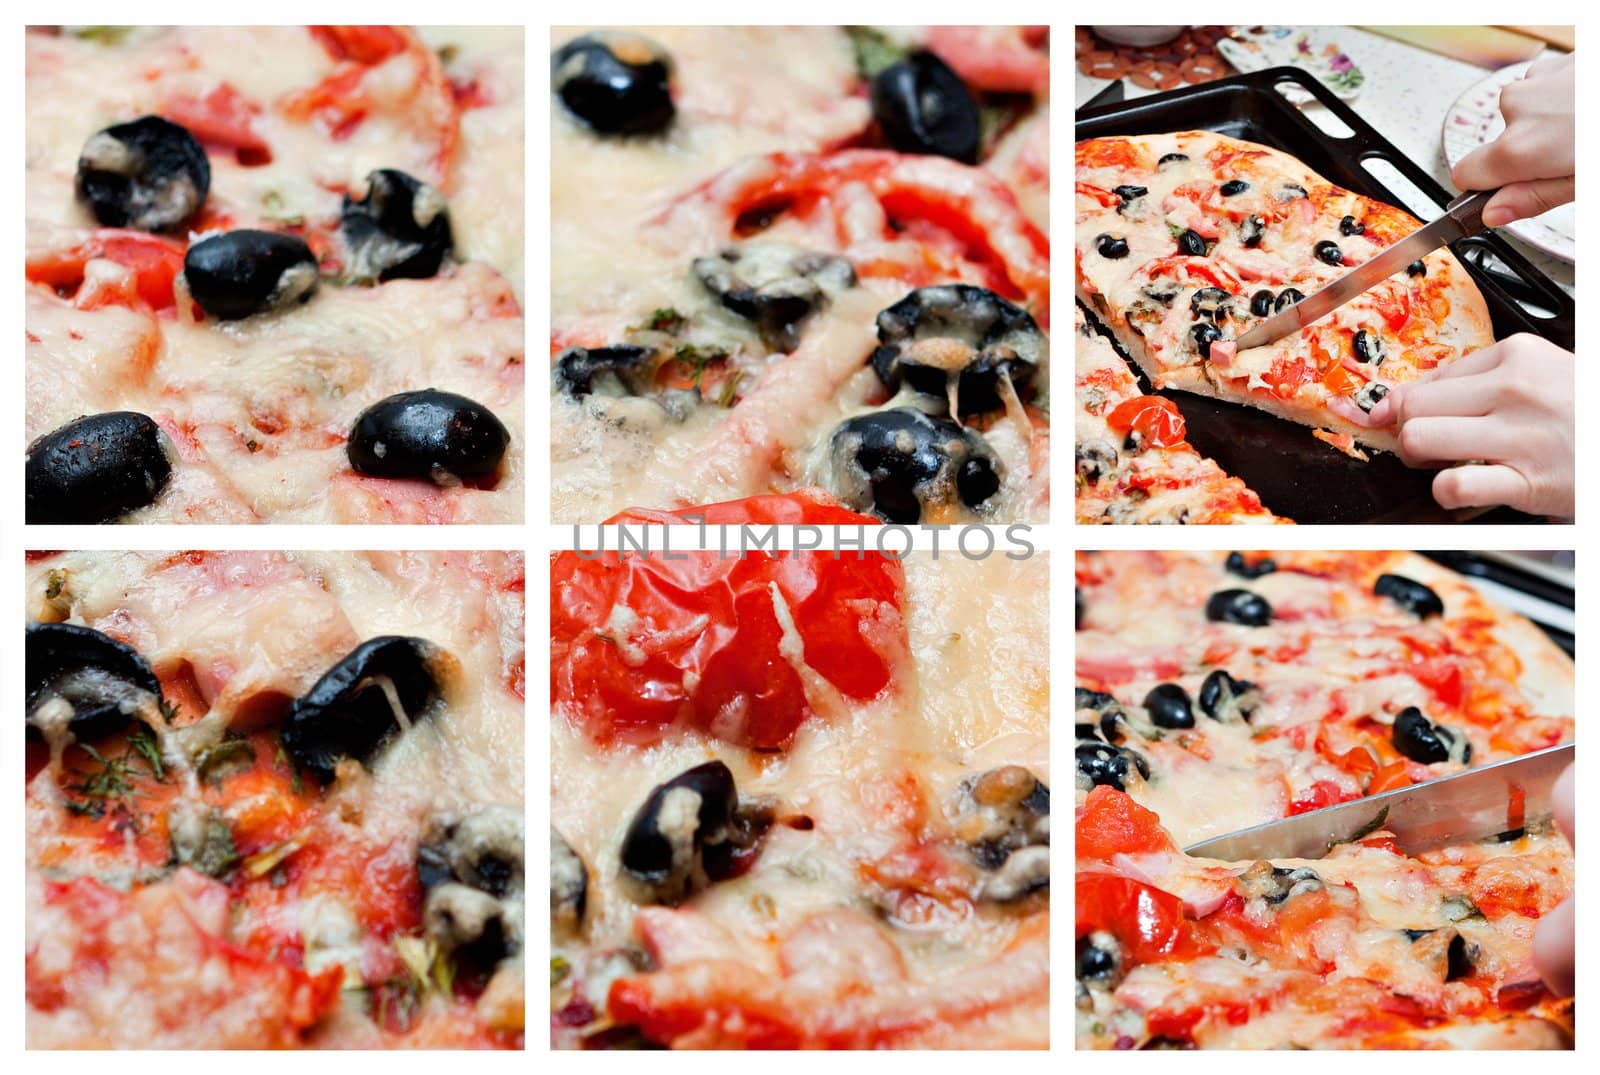 The collage of pizza with tomato and cheese